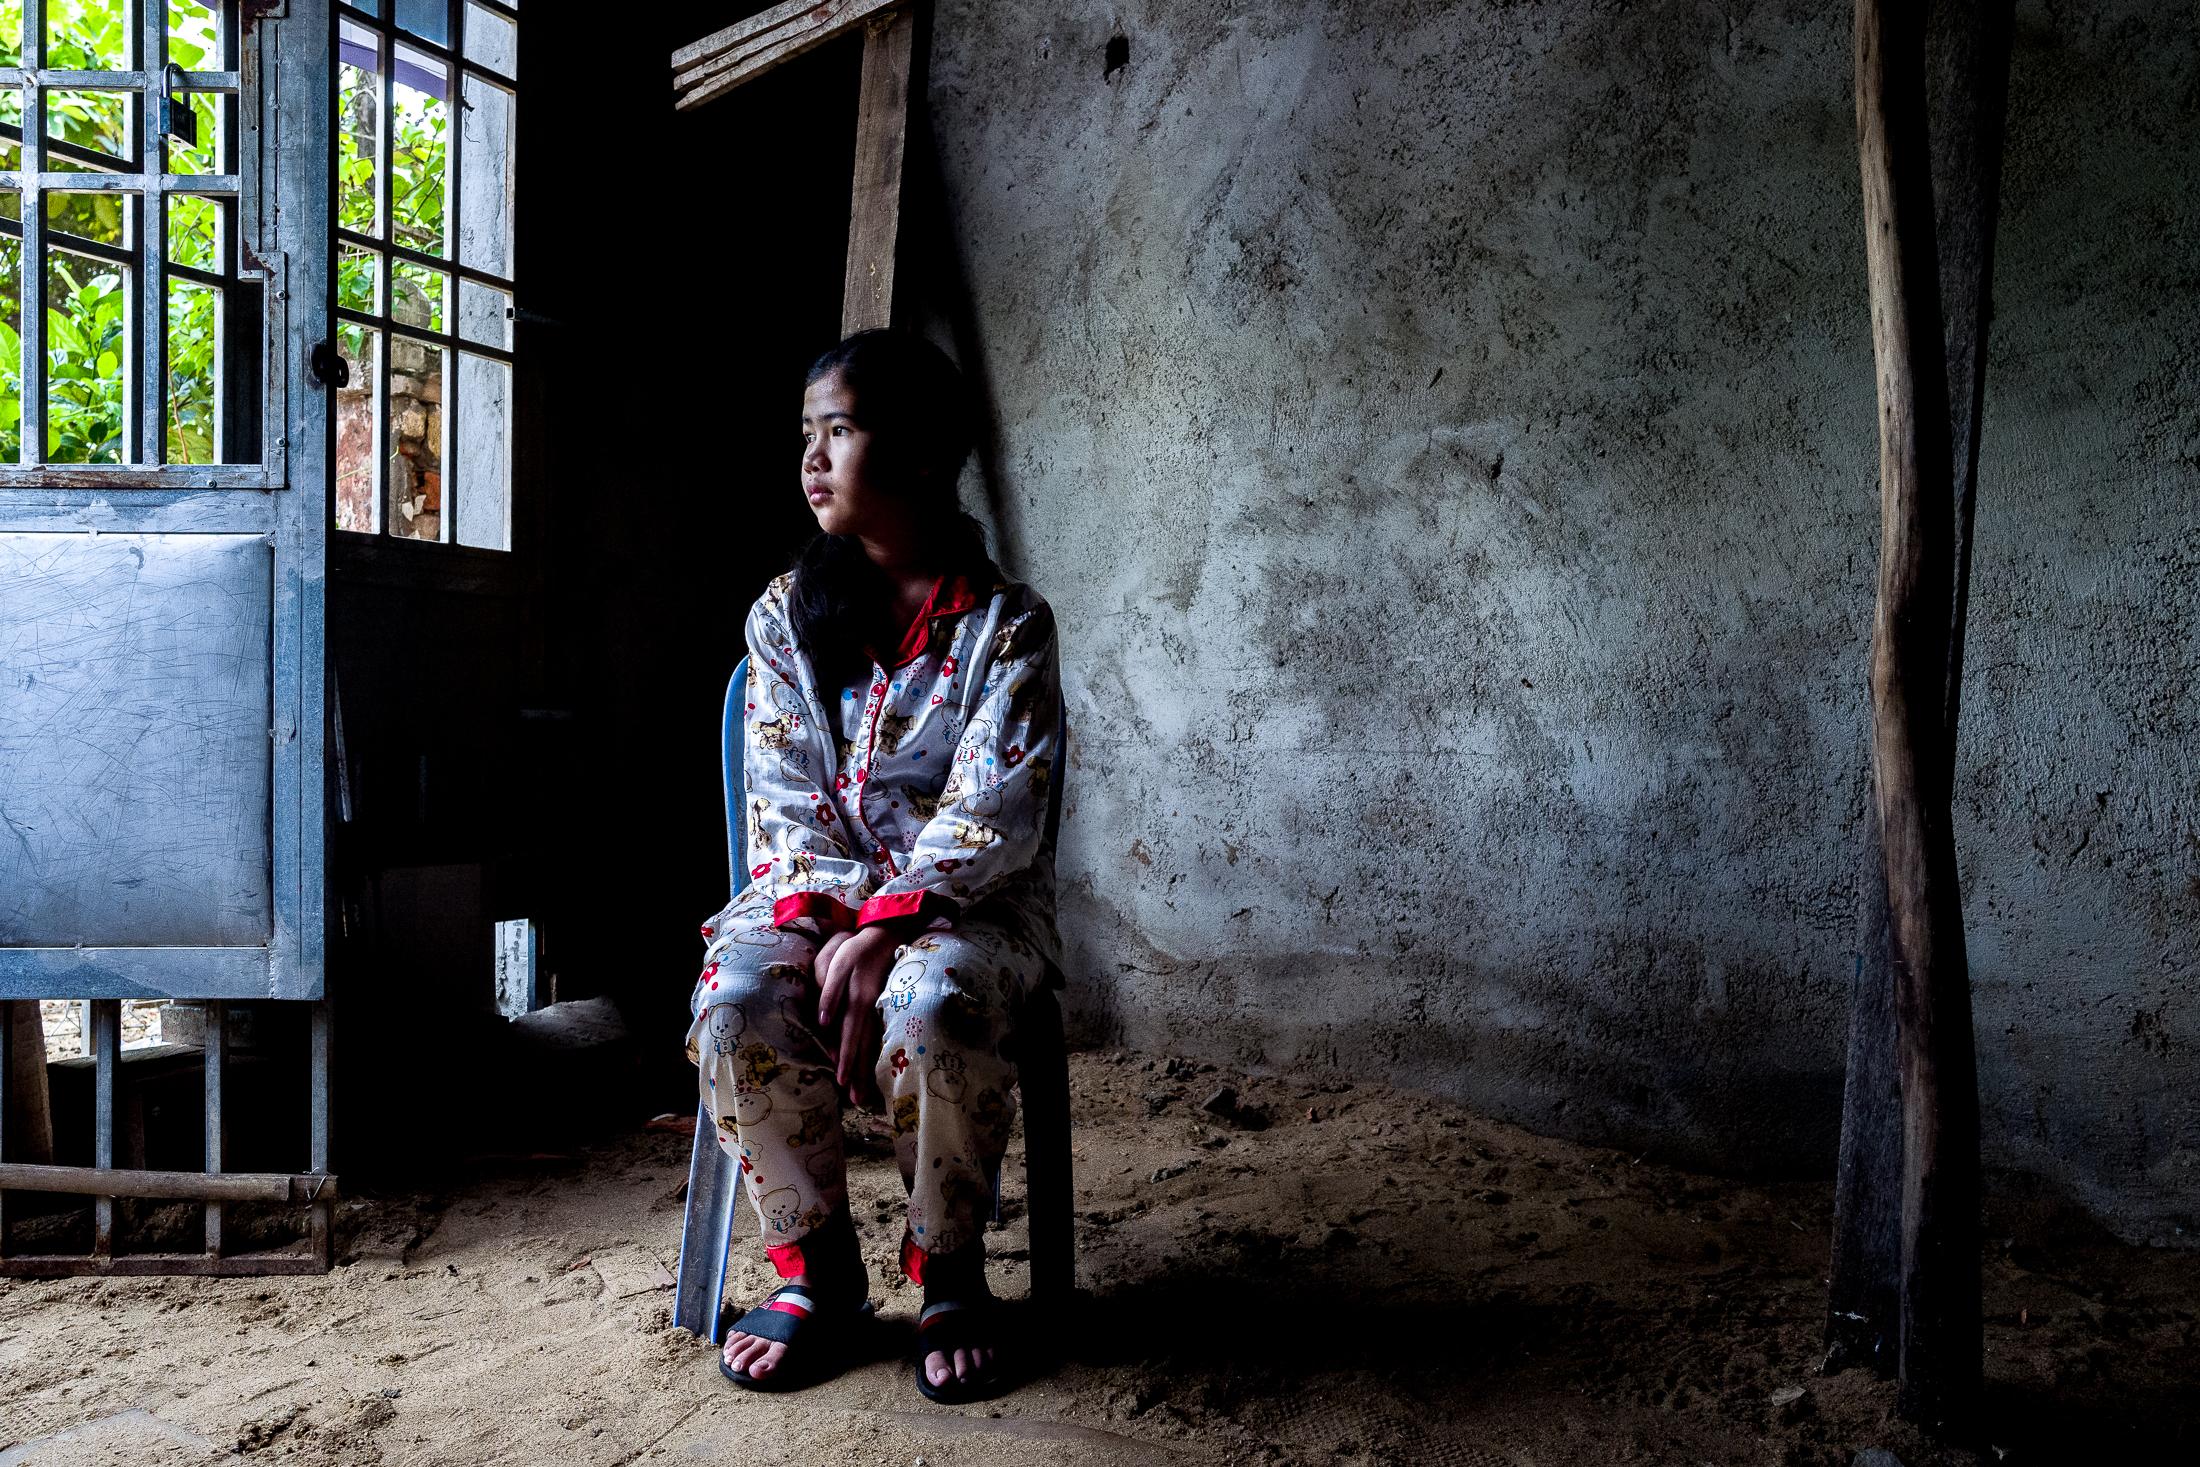 A woman's Cry: The detention of Tep Vanny - PHNOM PENH, CAMBODIA- SEPTEMBER 04: Tep Vanny's...